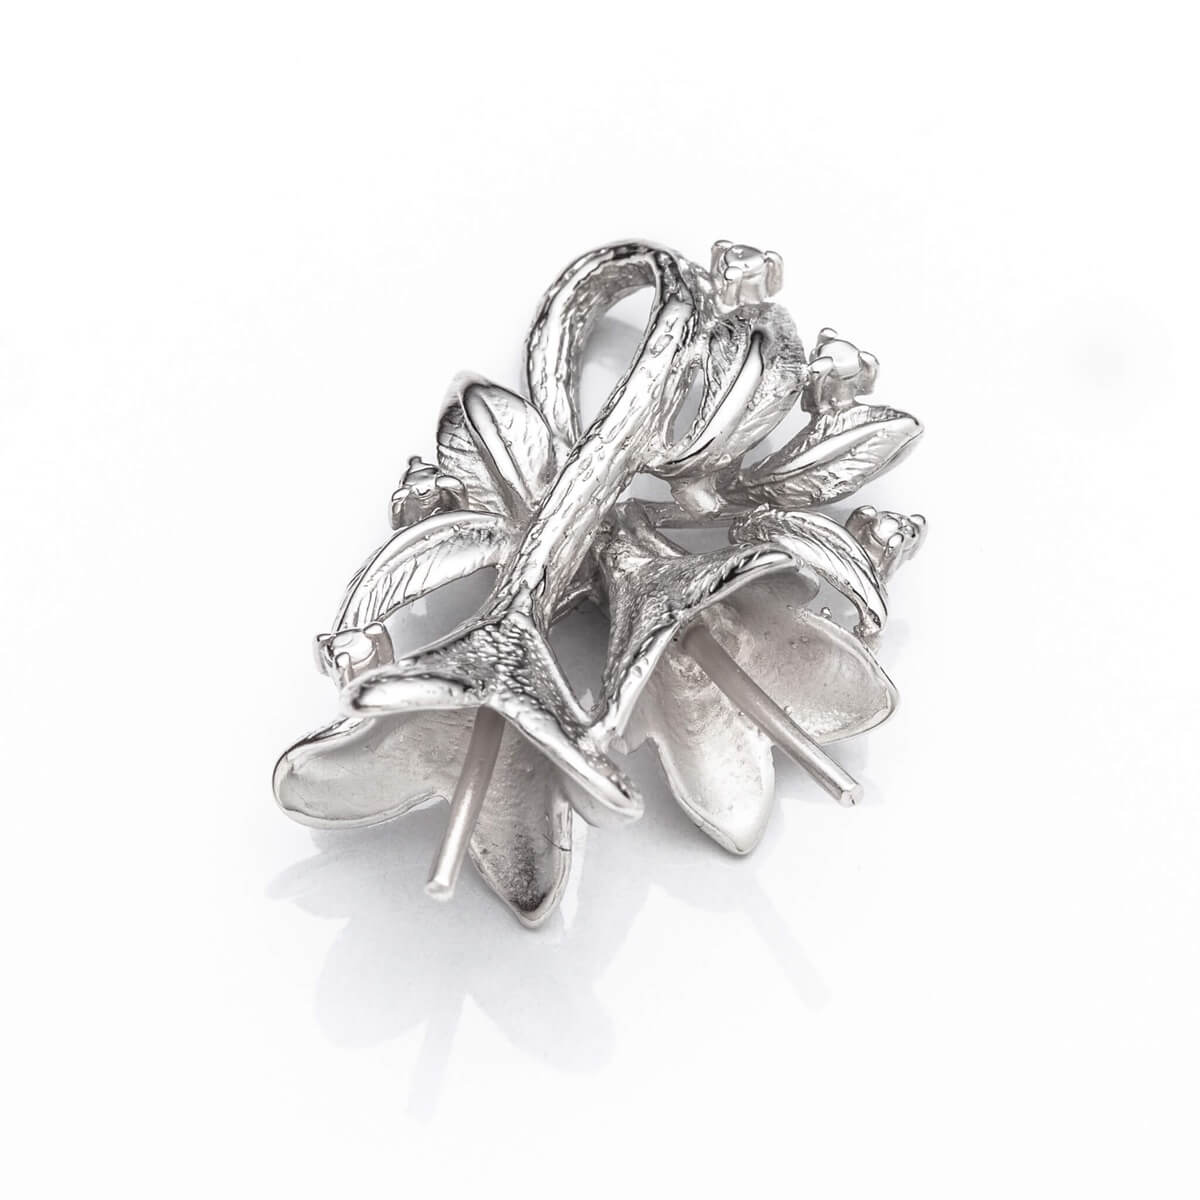 Leaf Pendant with Floral Cups and Peg Mountings in Sterling Silver 8mm 